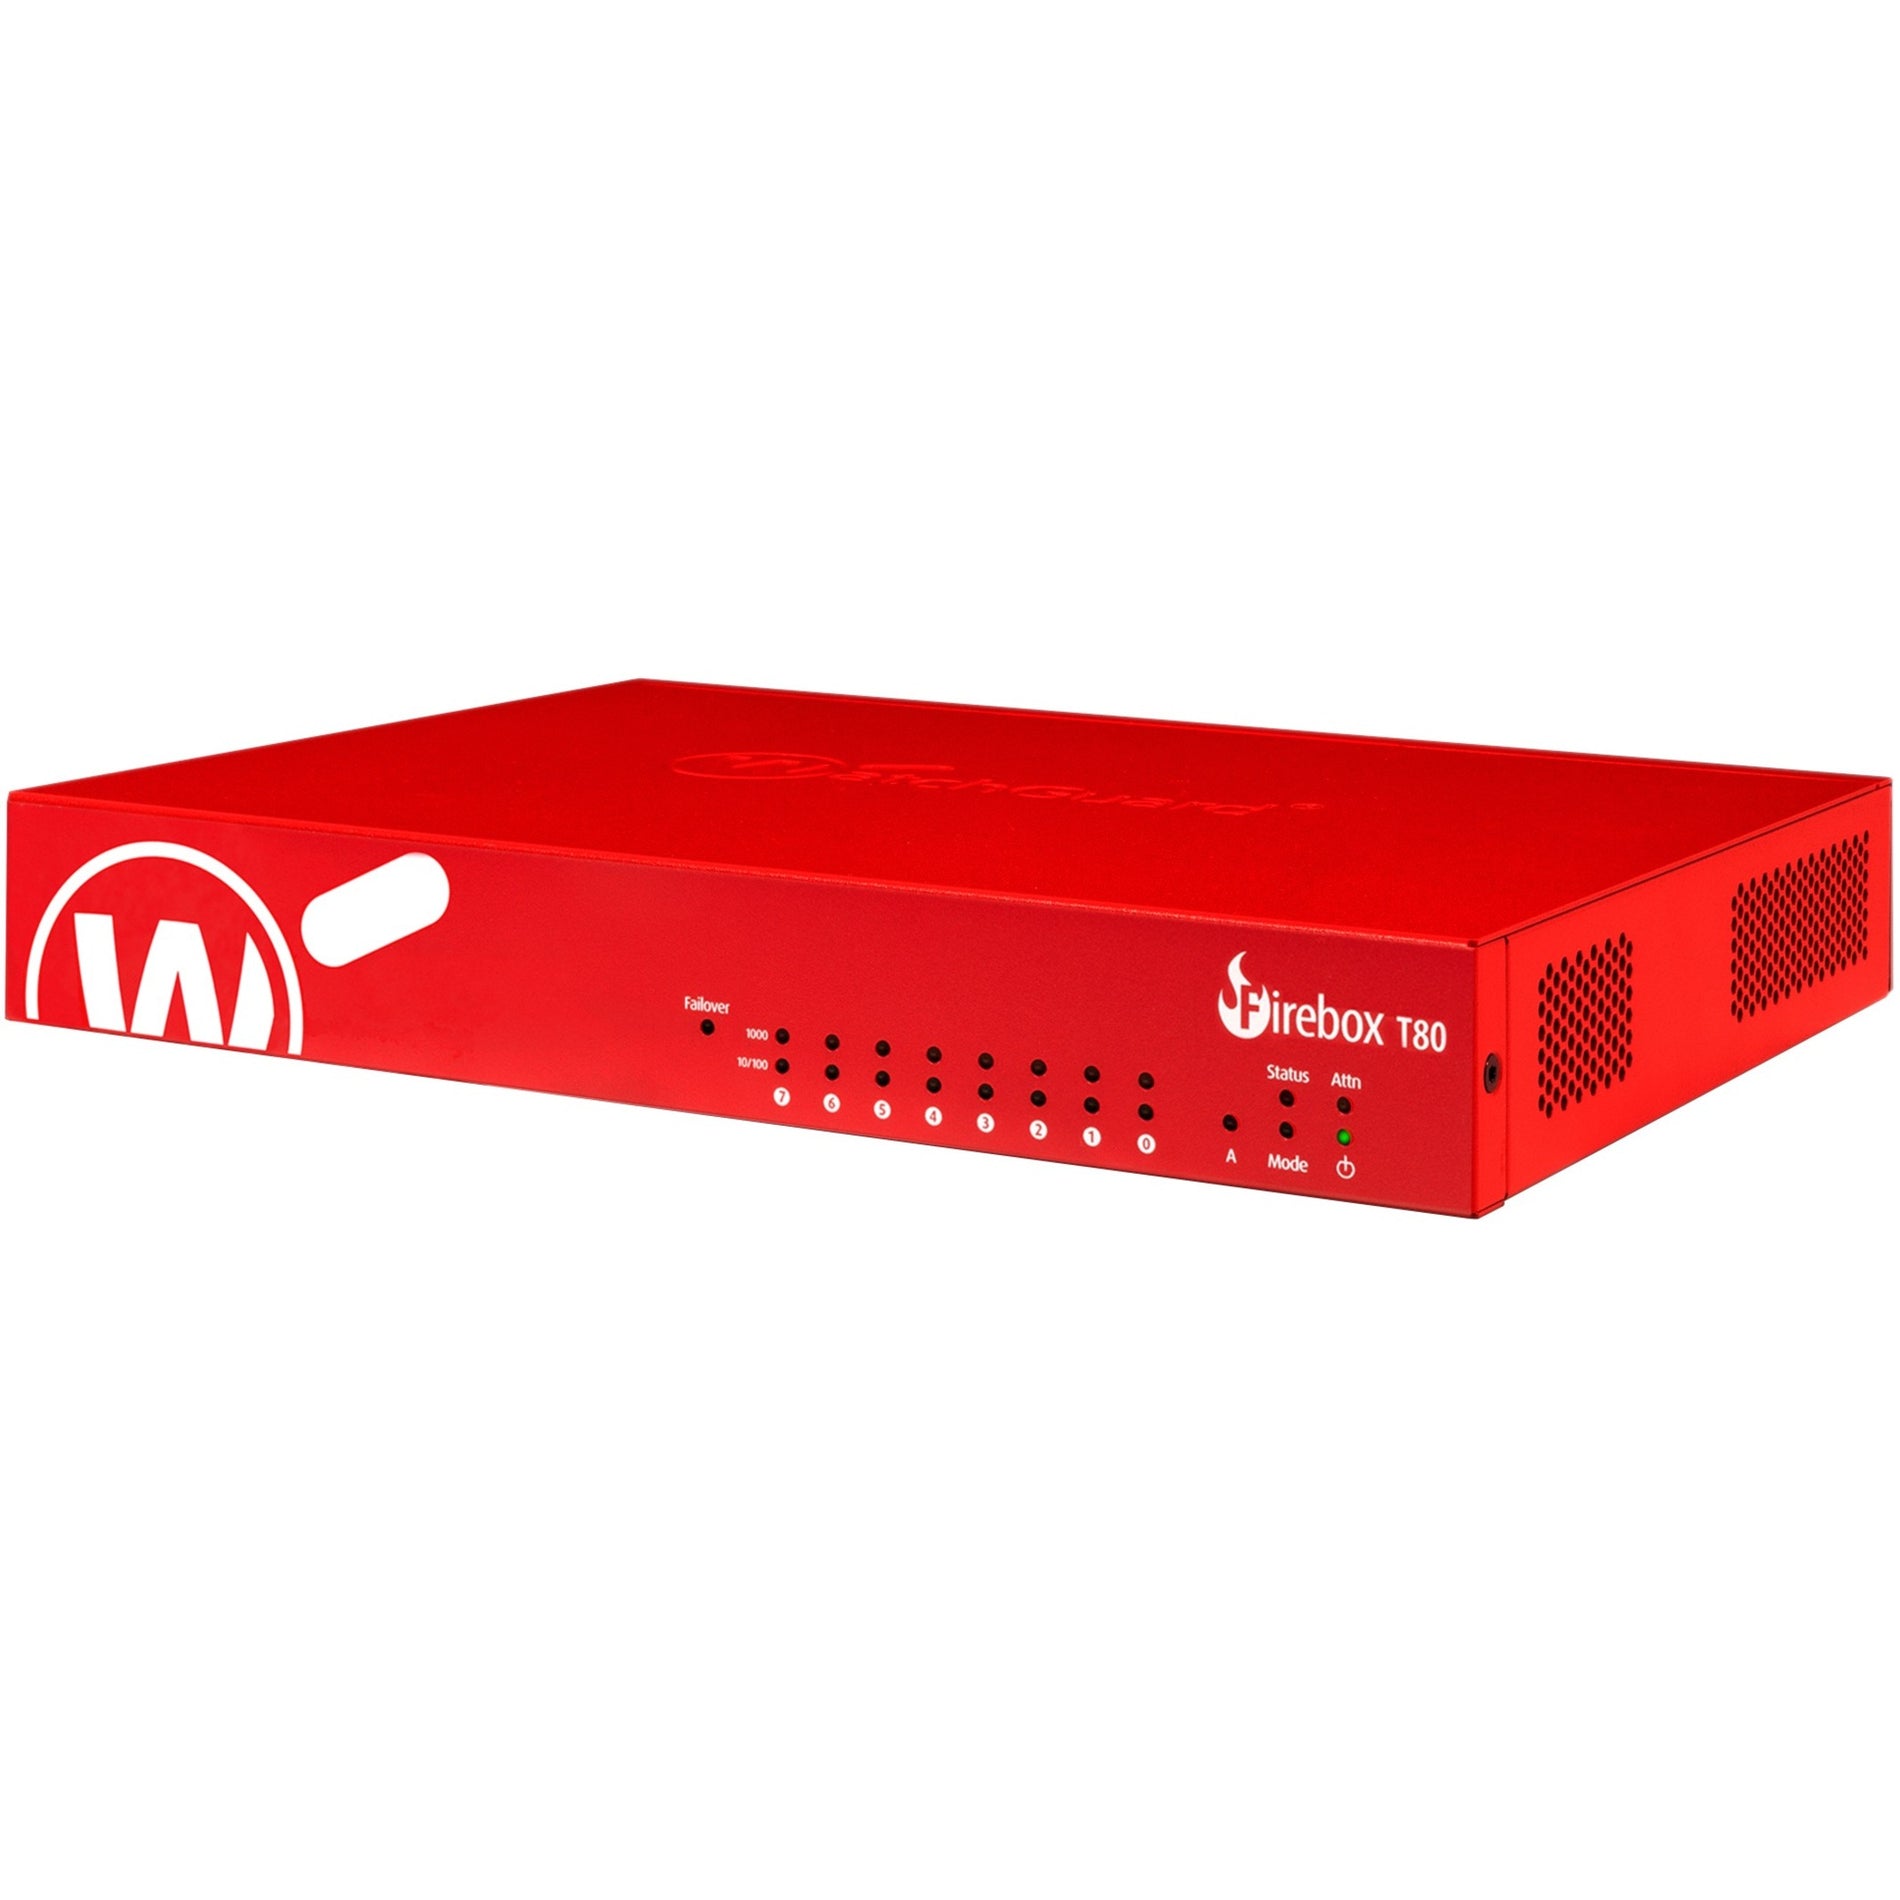 WatchGuard Firebox T80 Network Security/Firewall Appliance with 1-Year Basic Security Suite [Discontinued]